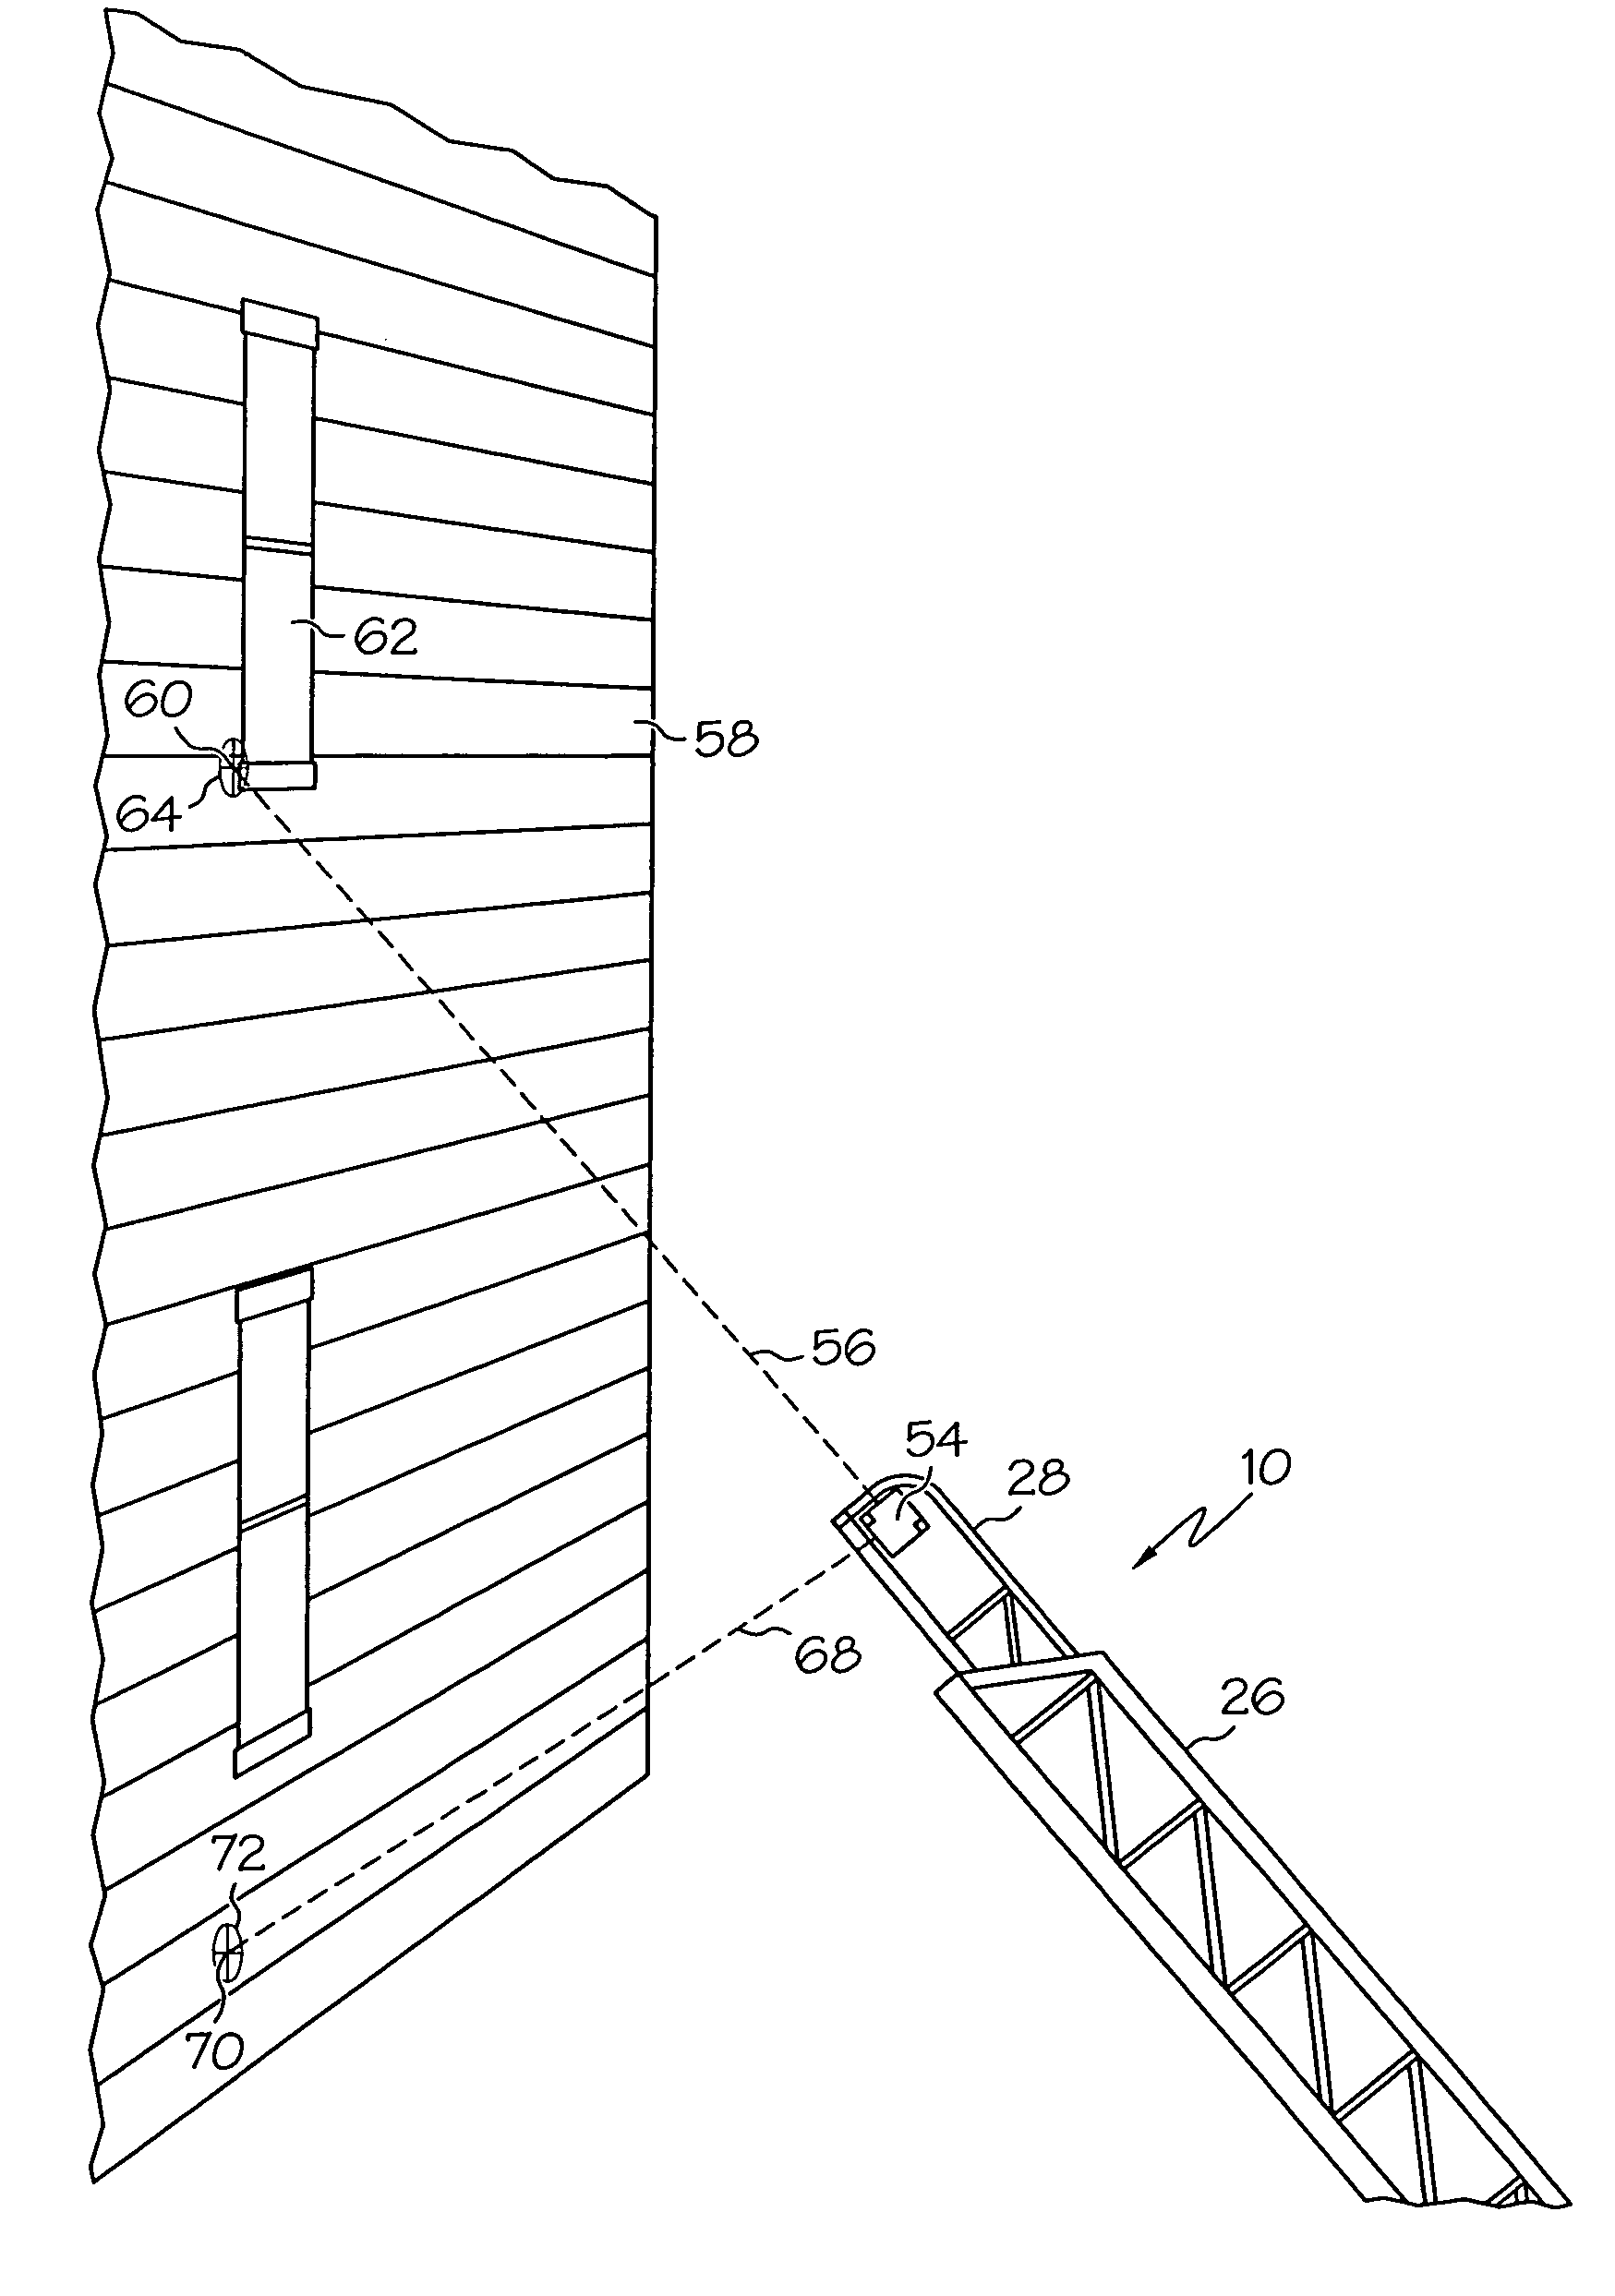 Laser-guided positioning device